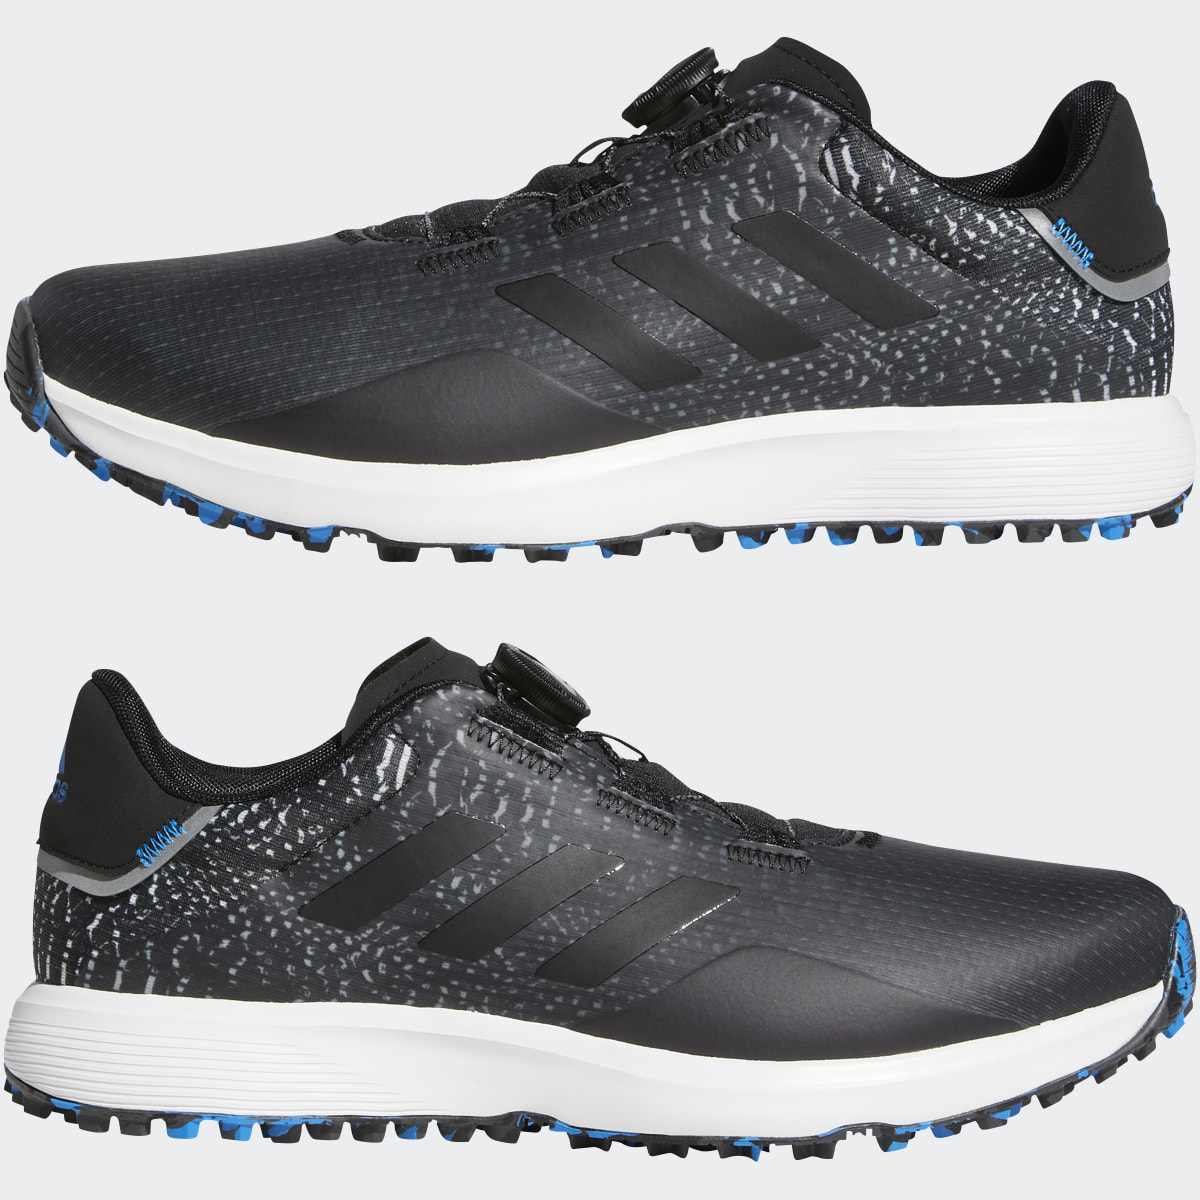 Adidas S2G BOA Wide Spikeless Golf Shoes. 8